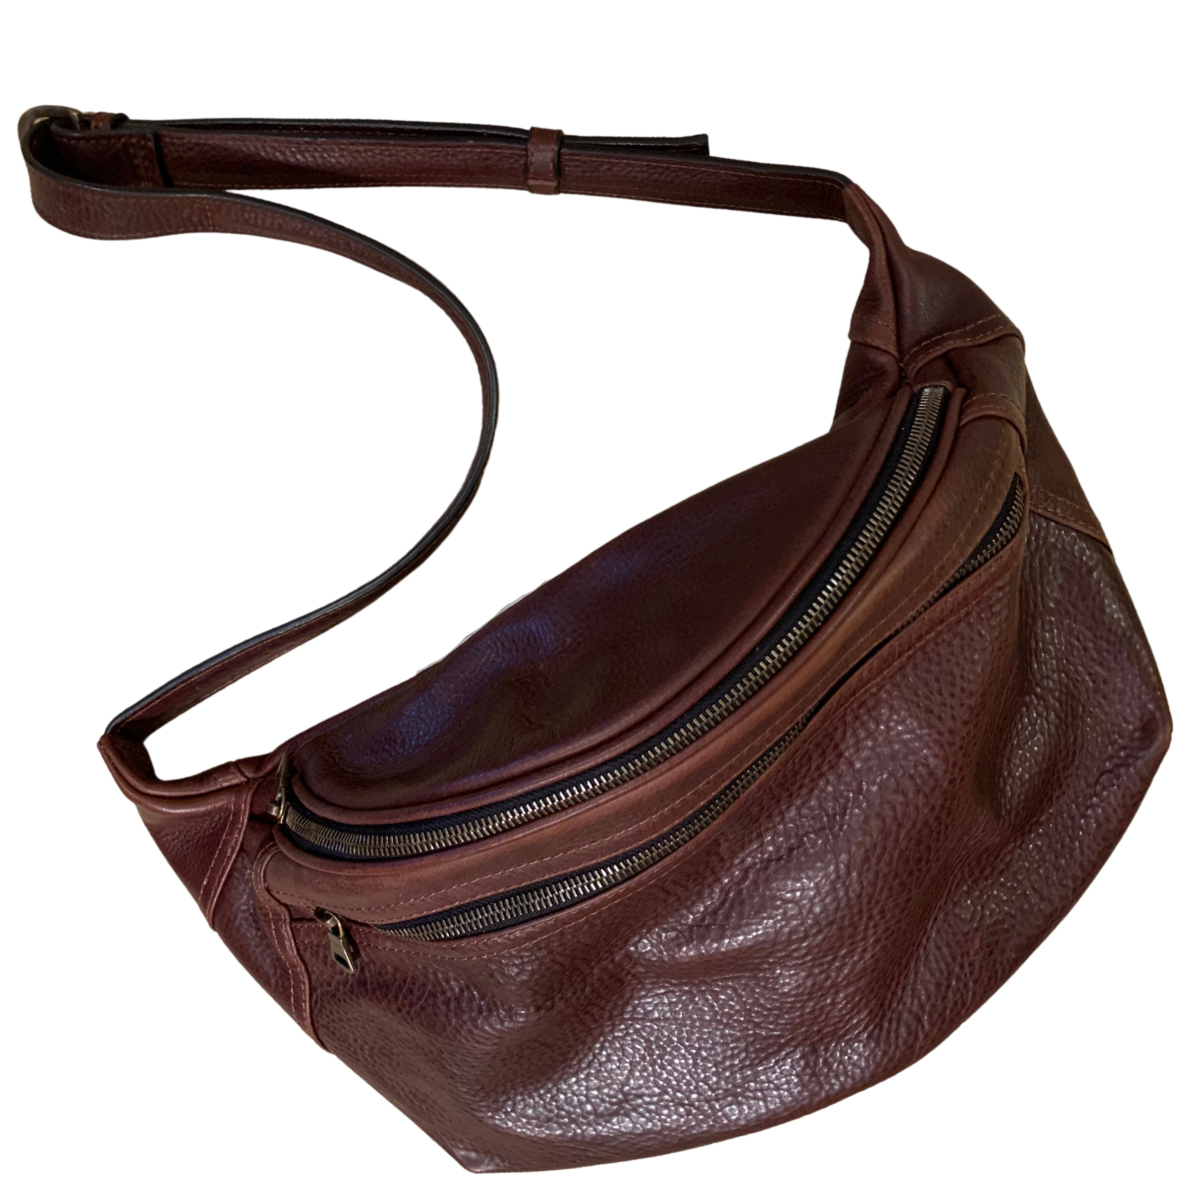 The Full Size Friday Concealed Carry Belt Bag